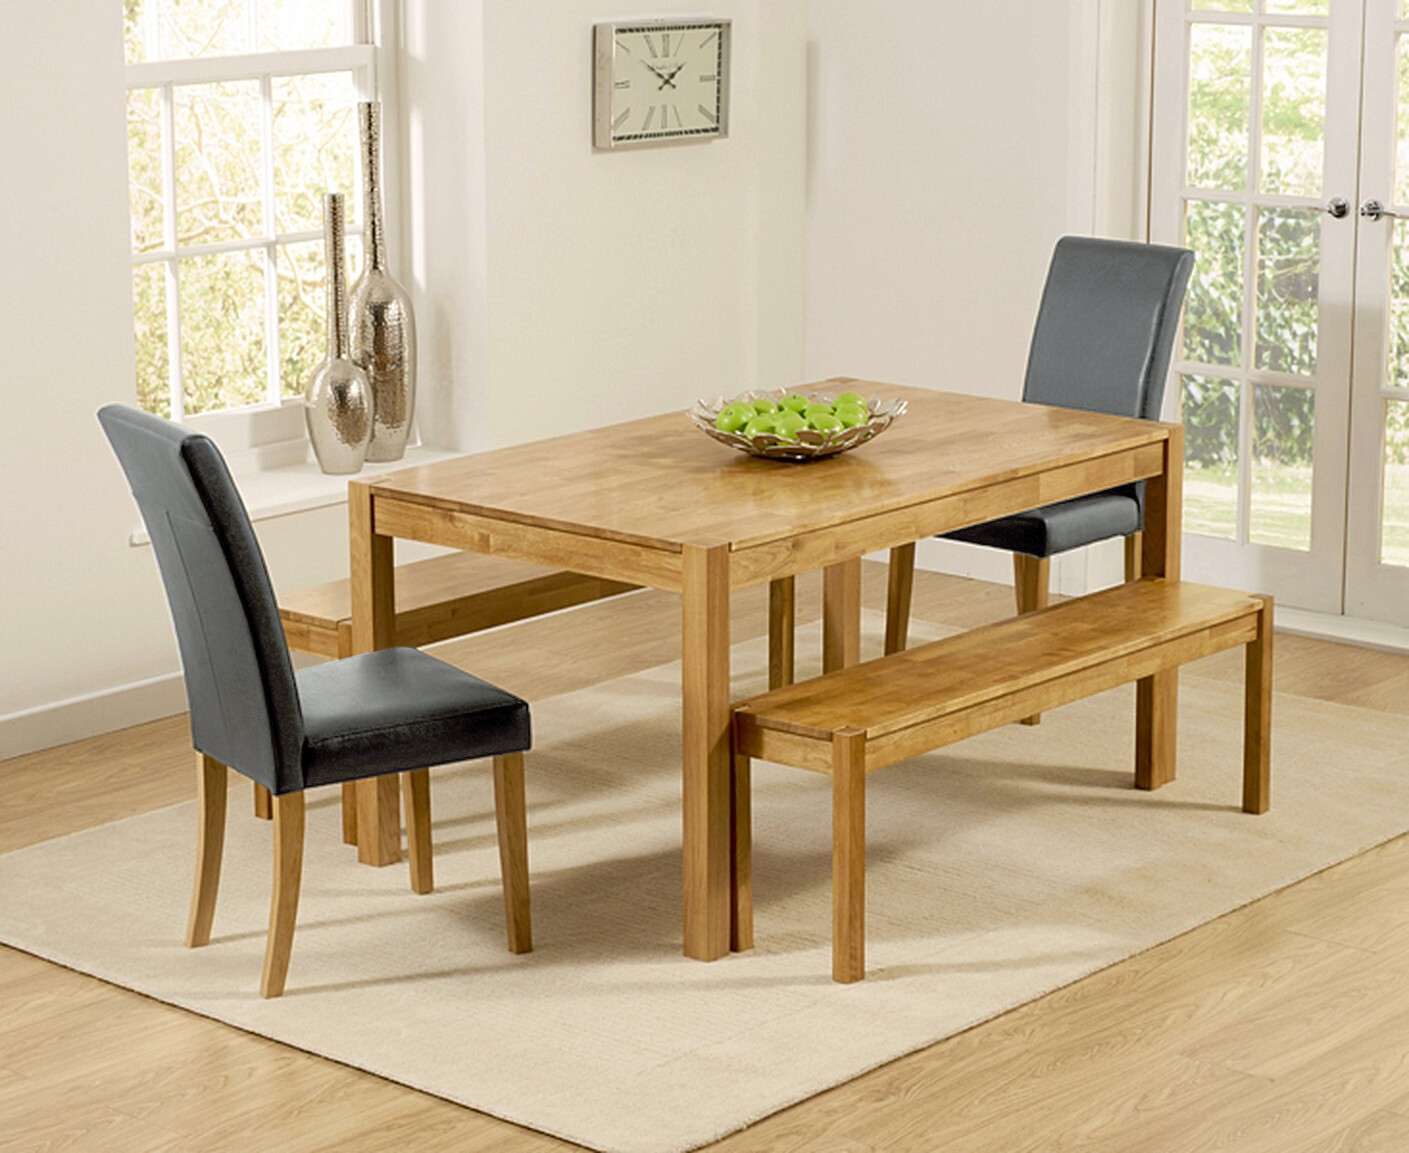 Photo 1 of York 150cm solid oak dining table with 2 grey olivia chairs and 1 york benches